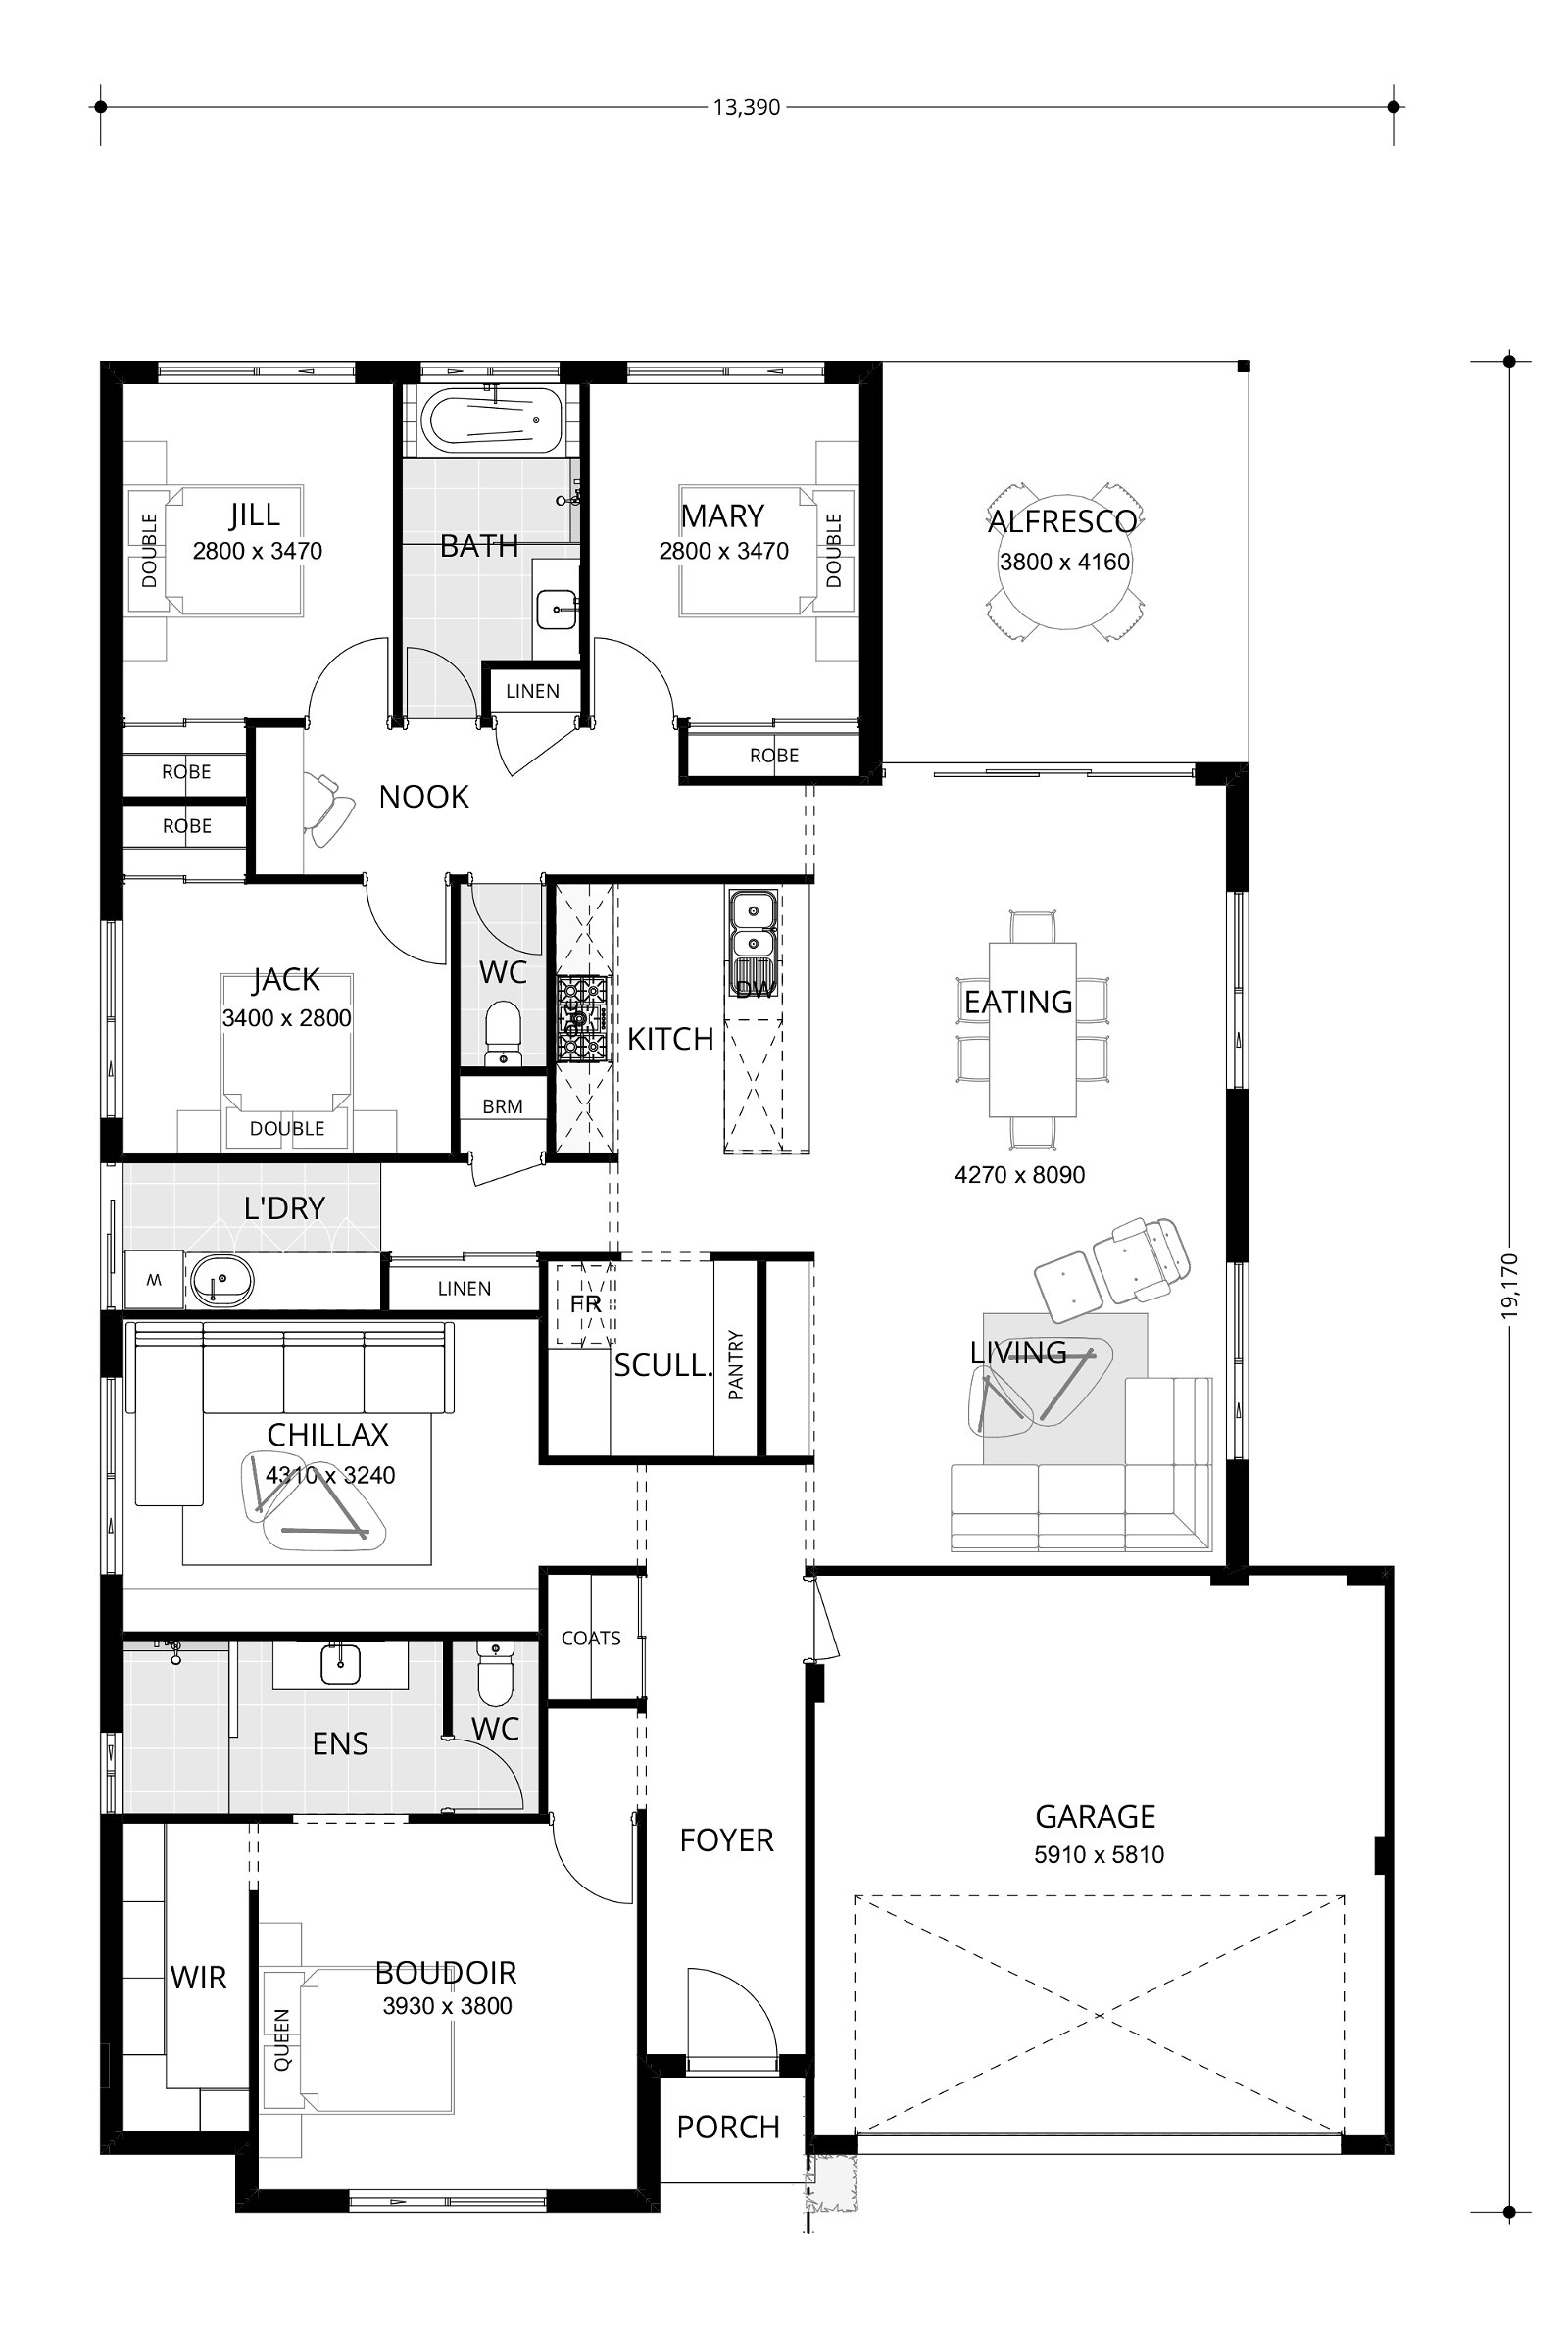 Residential Attitudes - The Great Divide - Floorplan - The Great Divide Floorplan Website